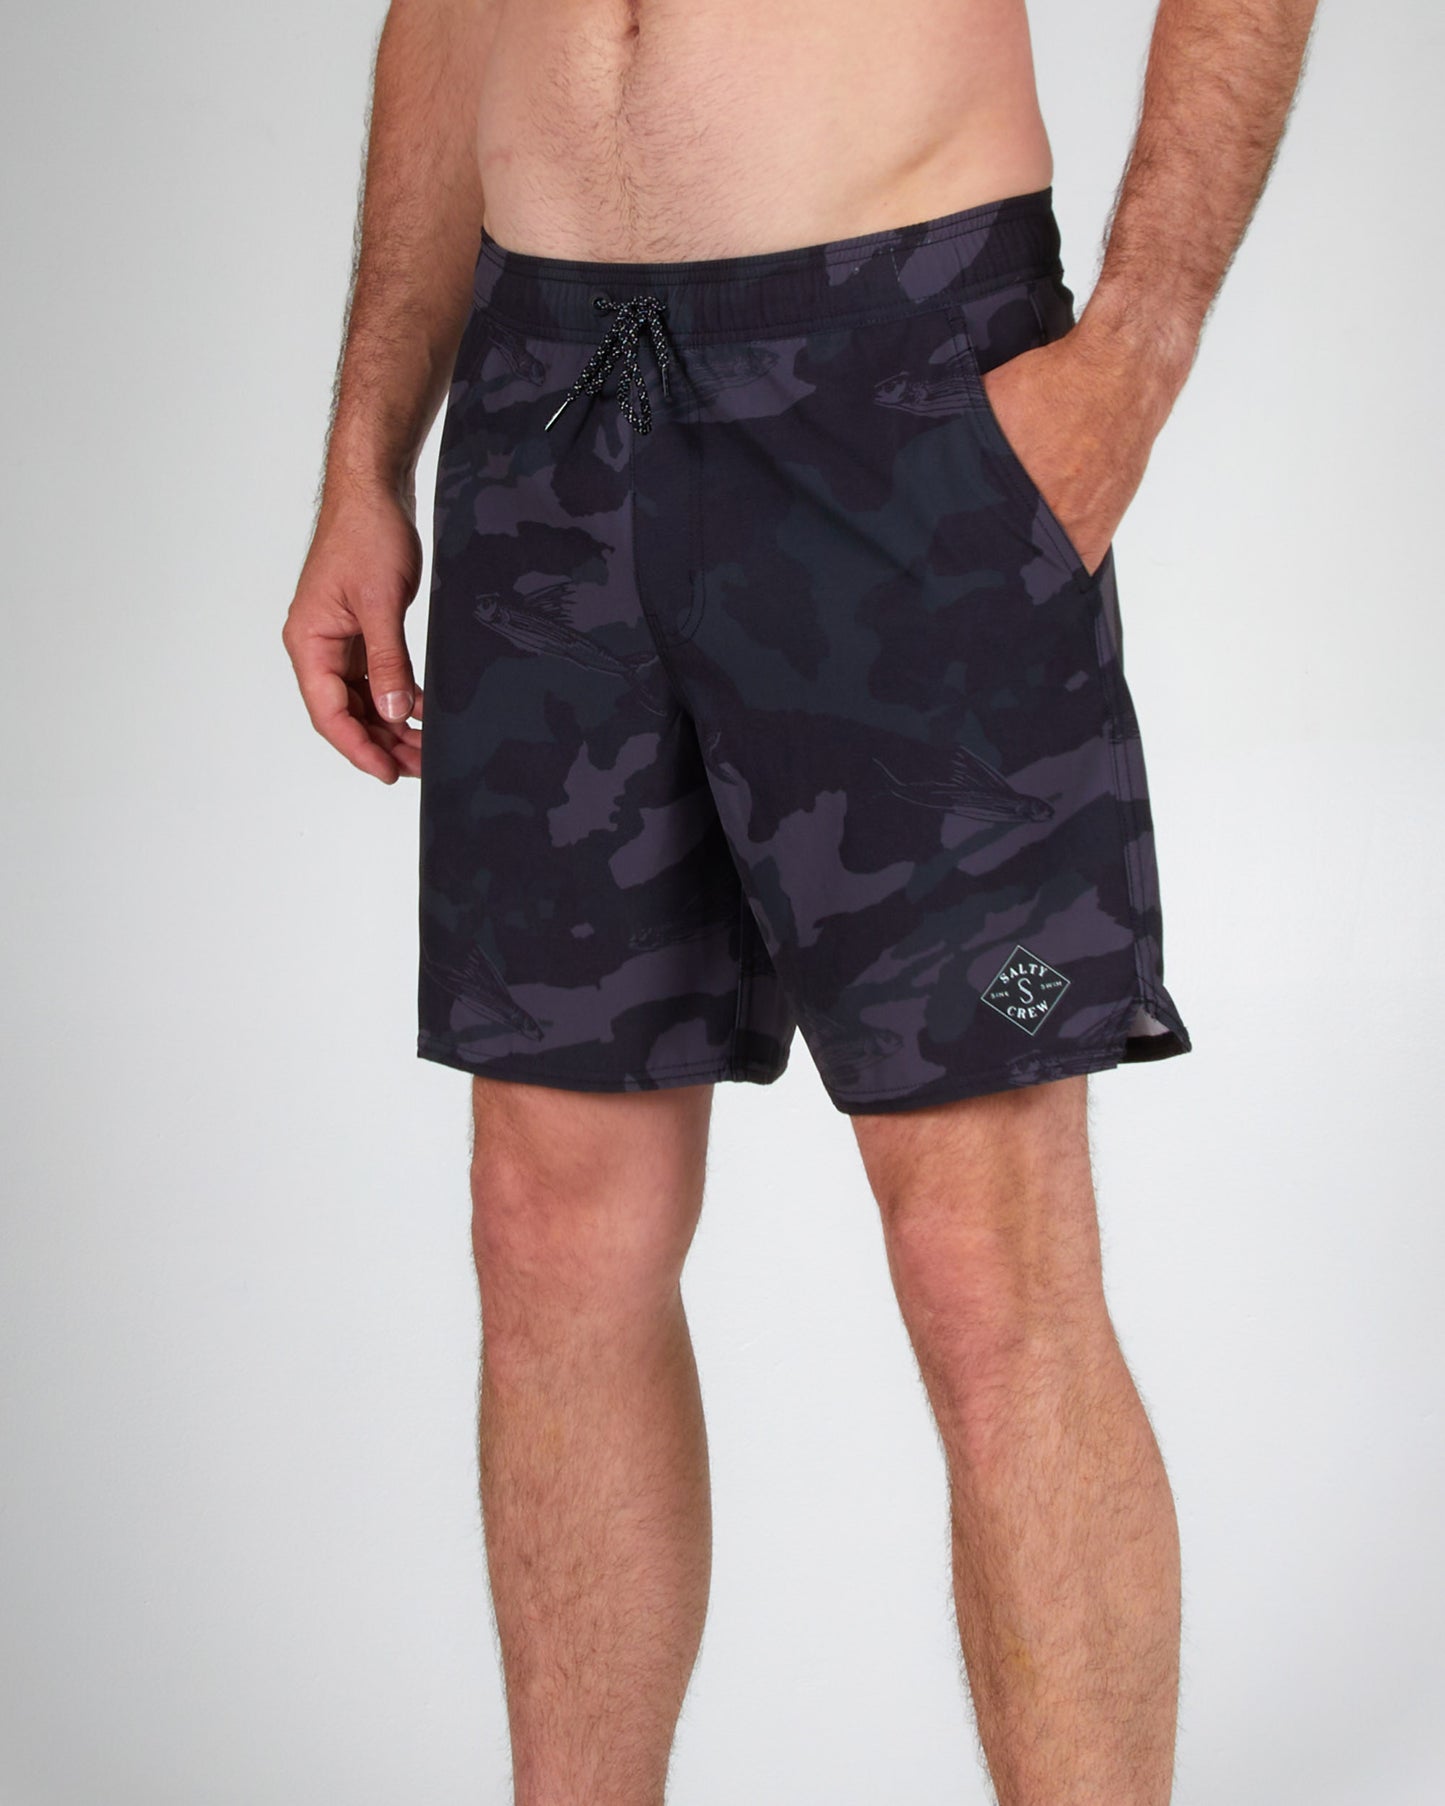 on body front angled of the Lowtide Black Camo Elastic Boardshort